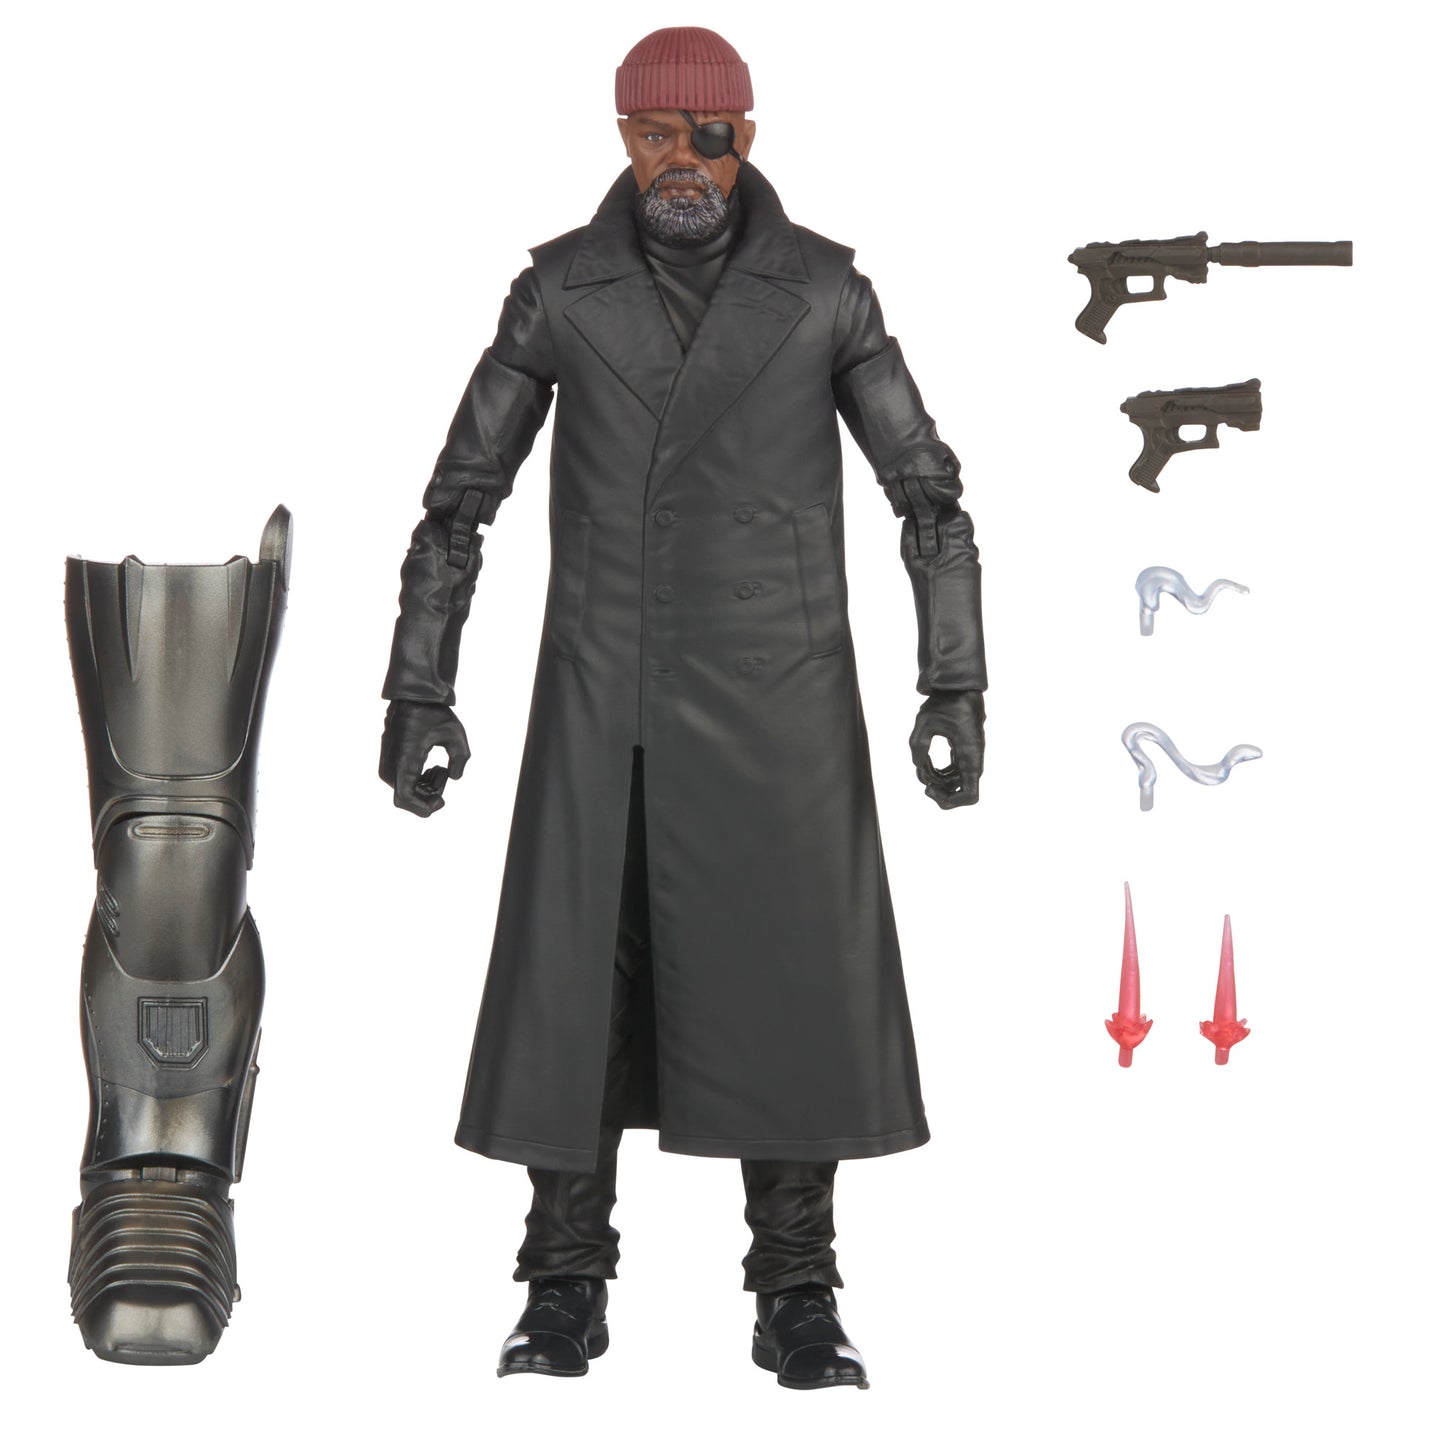 Marvel Legends Series Nick Fury Action Figure 6-Inch Toy with accessories - Heretoserveyou